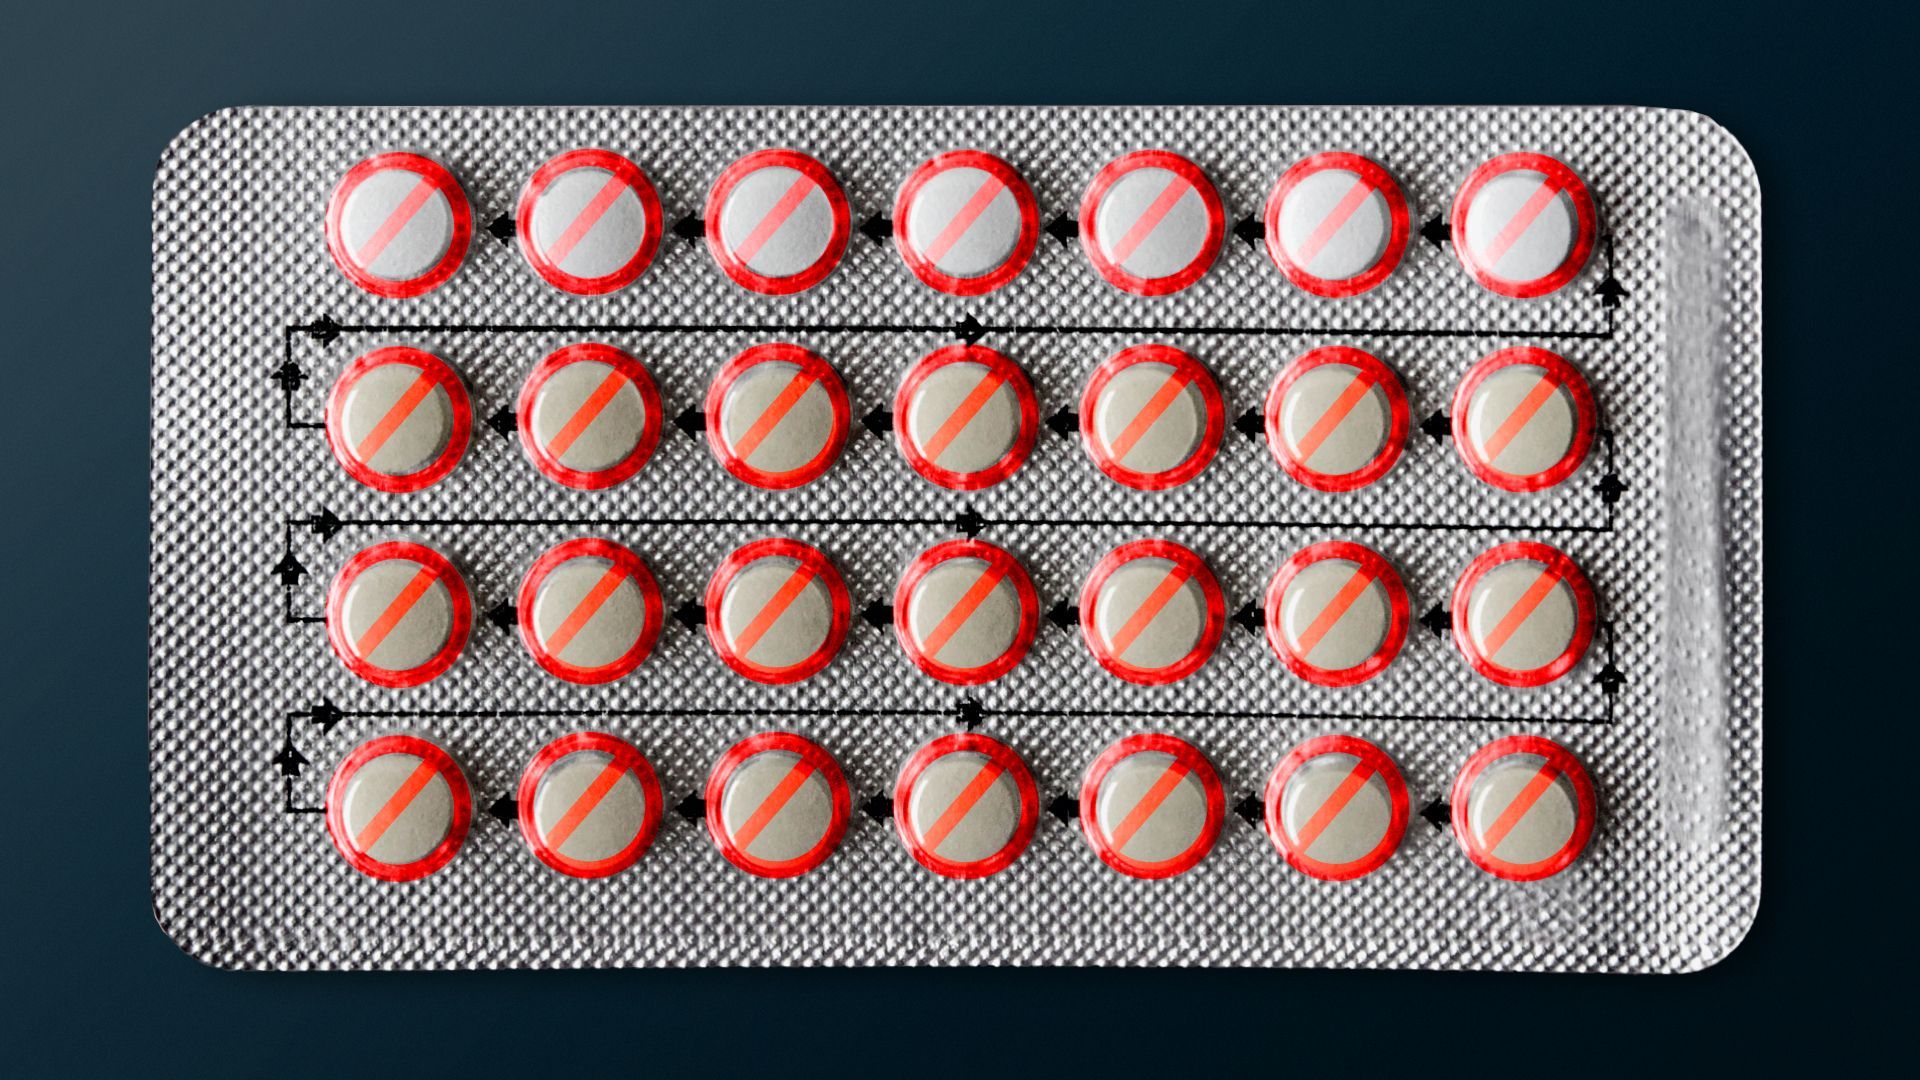 10 Possible Side Effects of Stopping Birth Control, According to